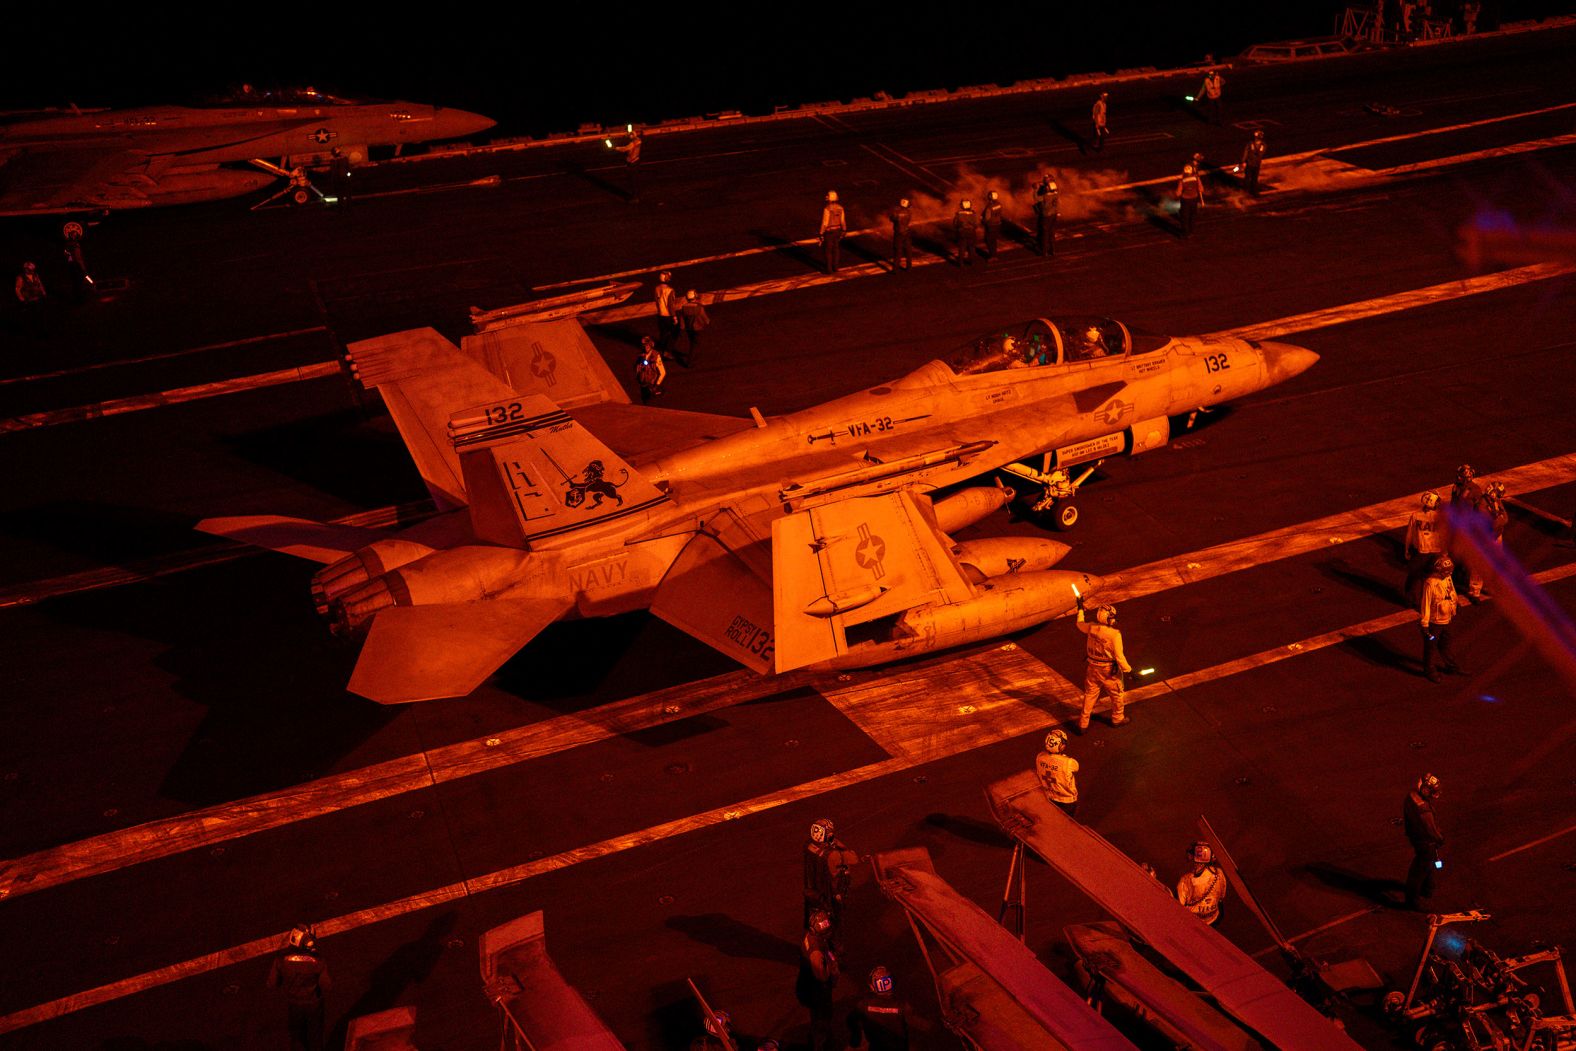 A fighter jet prepares to take off from the USS Dwight D. Eisenhower as it is deployed in the Red Sea on Monday, February 12. The aircraft carrier and the USS Gravely, a US Navy destroyer, are <a href="index.php?page=&url=https%3A%2F%2Fwww.cnn.com%2F2024%2F02%2F14%2Fpolitics%2Fus-navy-houthi-fight-red-sea%2Findex.html" target="_blank">spearheading the US response to Houthi attacks in the region</a>.